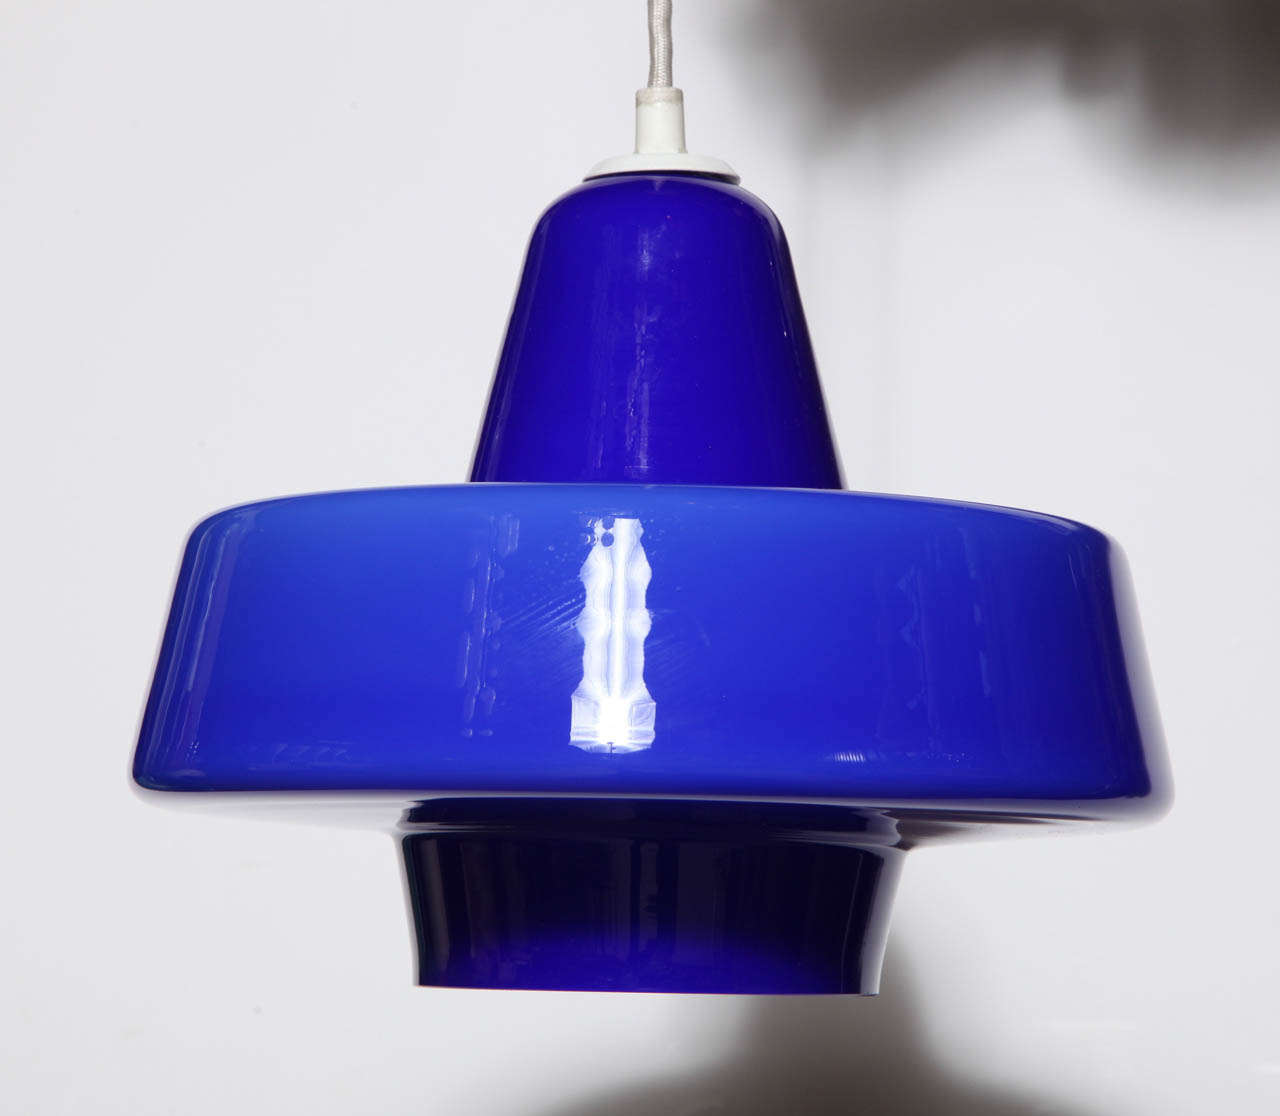 Danish Modern Adjustable Holmegaard Style Bright Cobalt Blue Glass Hanging Pendant. Featuring a modernist bell shape form with a brilliant vivid Blue glass exterior and White interior. With long, adjustable 5.5' white cord. 